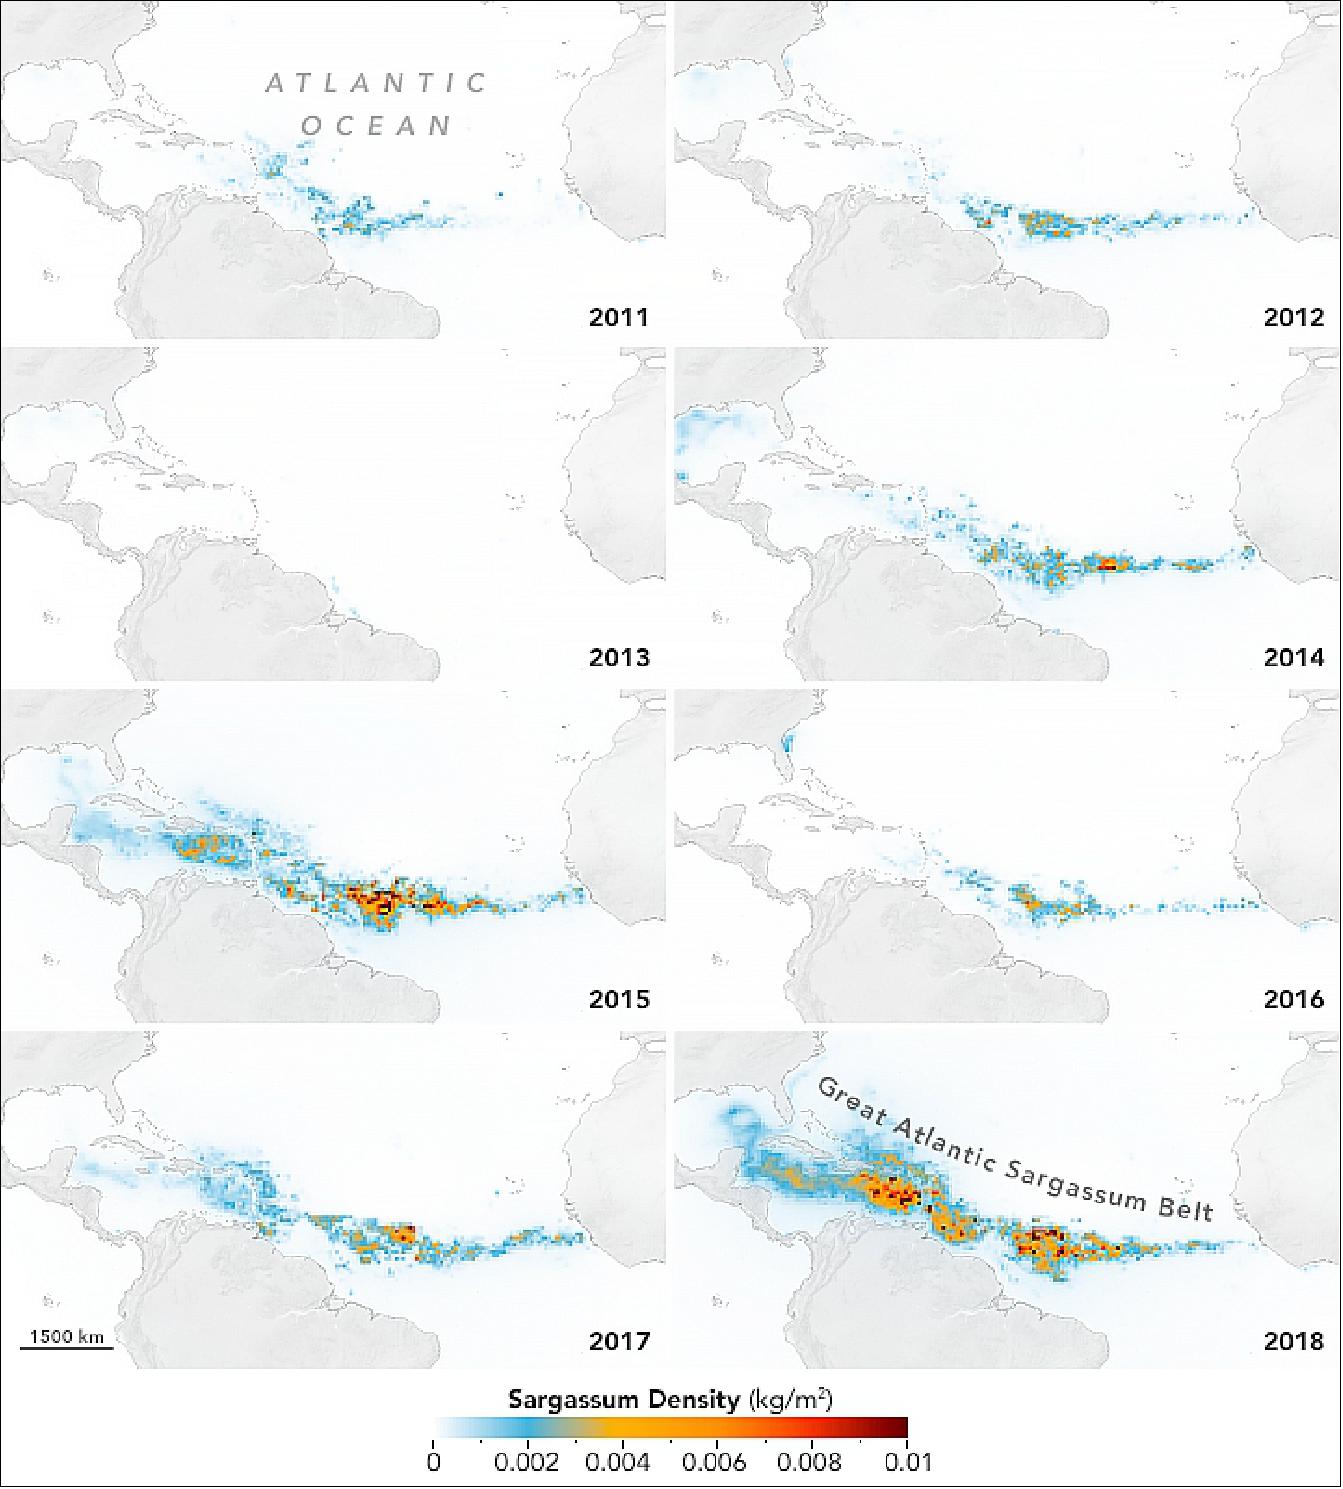 Figure 24: This map depicts the monthly mean density of Sargassum in the Atlantic Ocean in each July from 2011 to 2018 (image credit: NASA Earth Observatory images by Joshua Stevens, using MODIS data courtesy of Wang, M., et al. (2019). Story by Kristen Kusek, University of South Florida; edited by Michael Carlowicz. This research was funded by NASA’s Earth Science Division, the NOAA RESTORE Science Program, the JPSS/NOAA Cal/Val project, the National Science Foundation, and a William and Elsie Knight Endowed Fellowship)